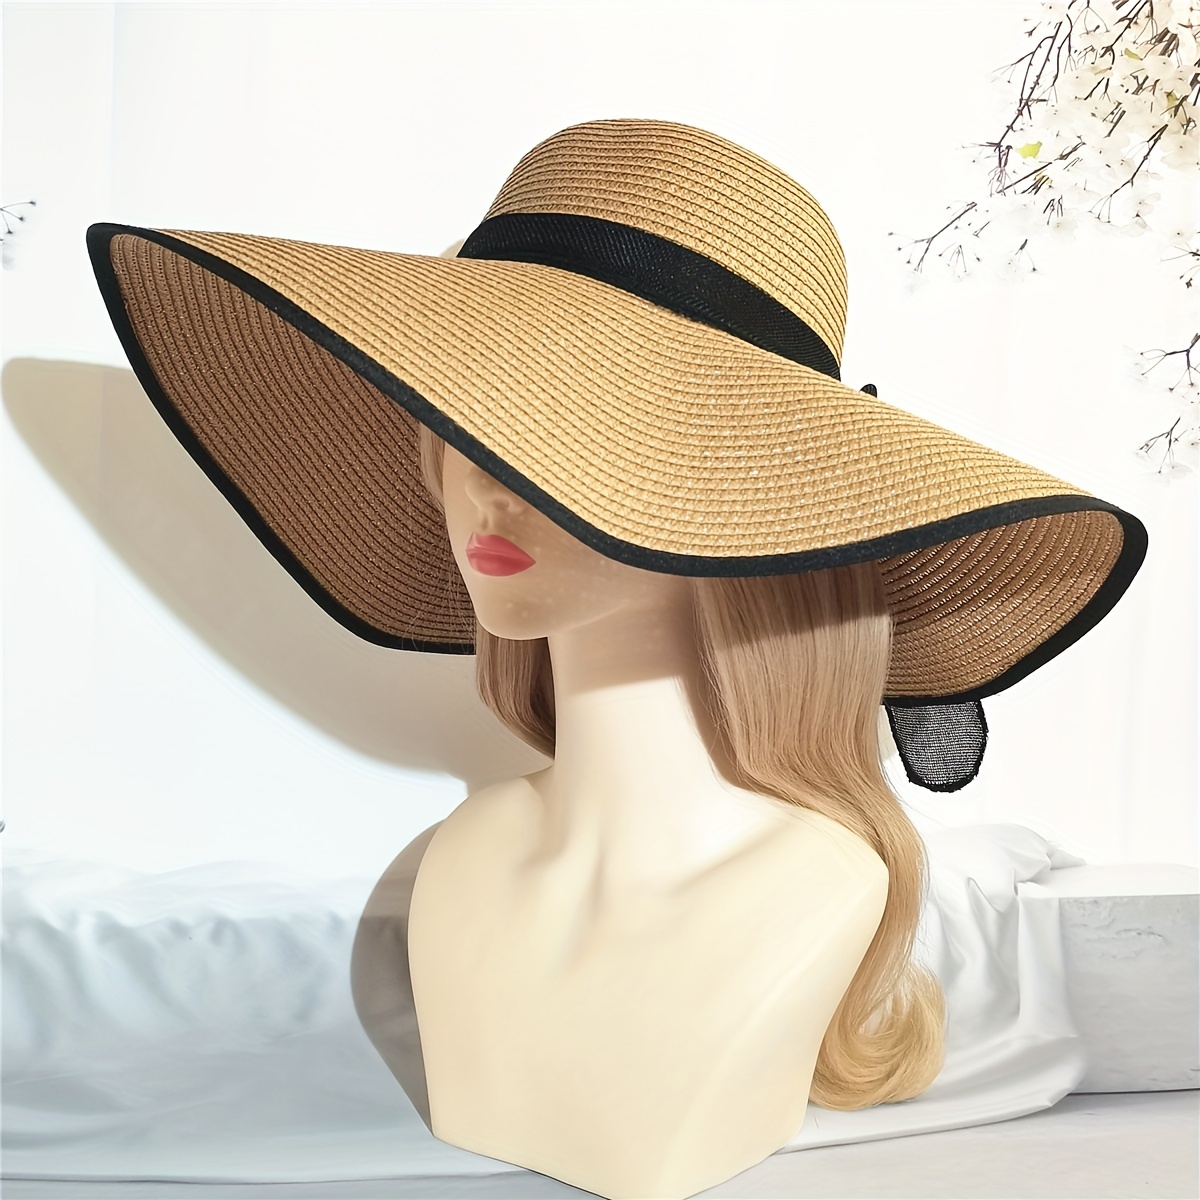 Mexicans Sombrero Hats Wide Brimmed Sunproof Straw Hat Photoshooting Props  Hat Adult Unisex Top Hats Carnivals Costume